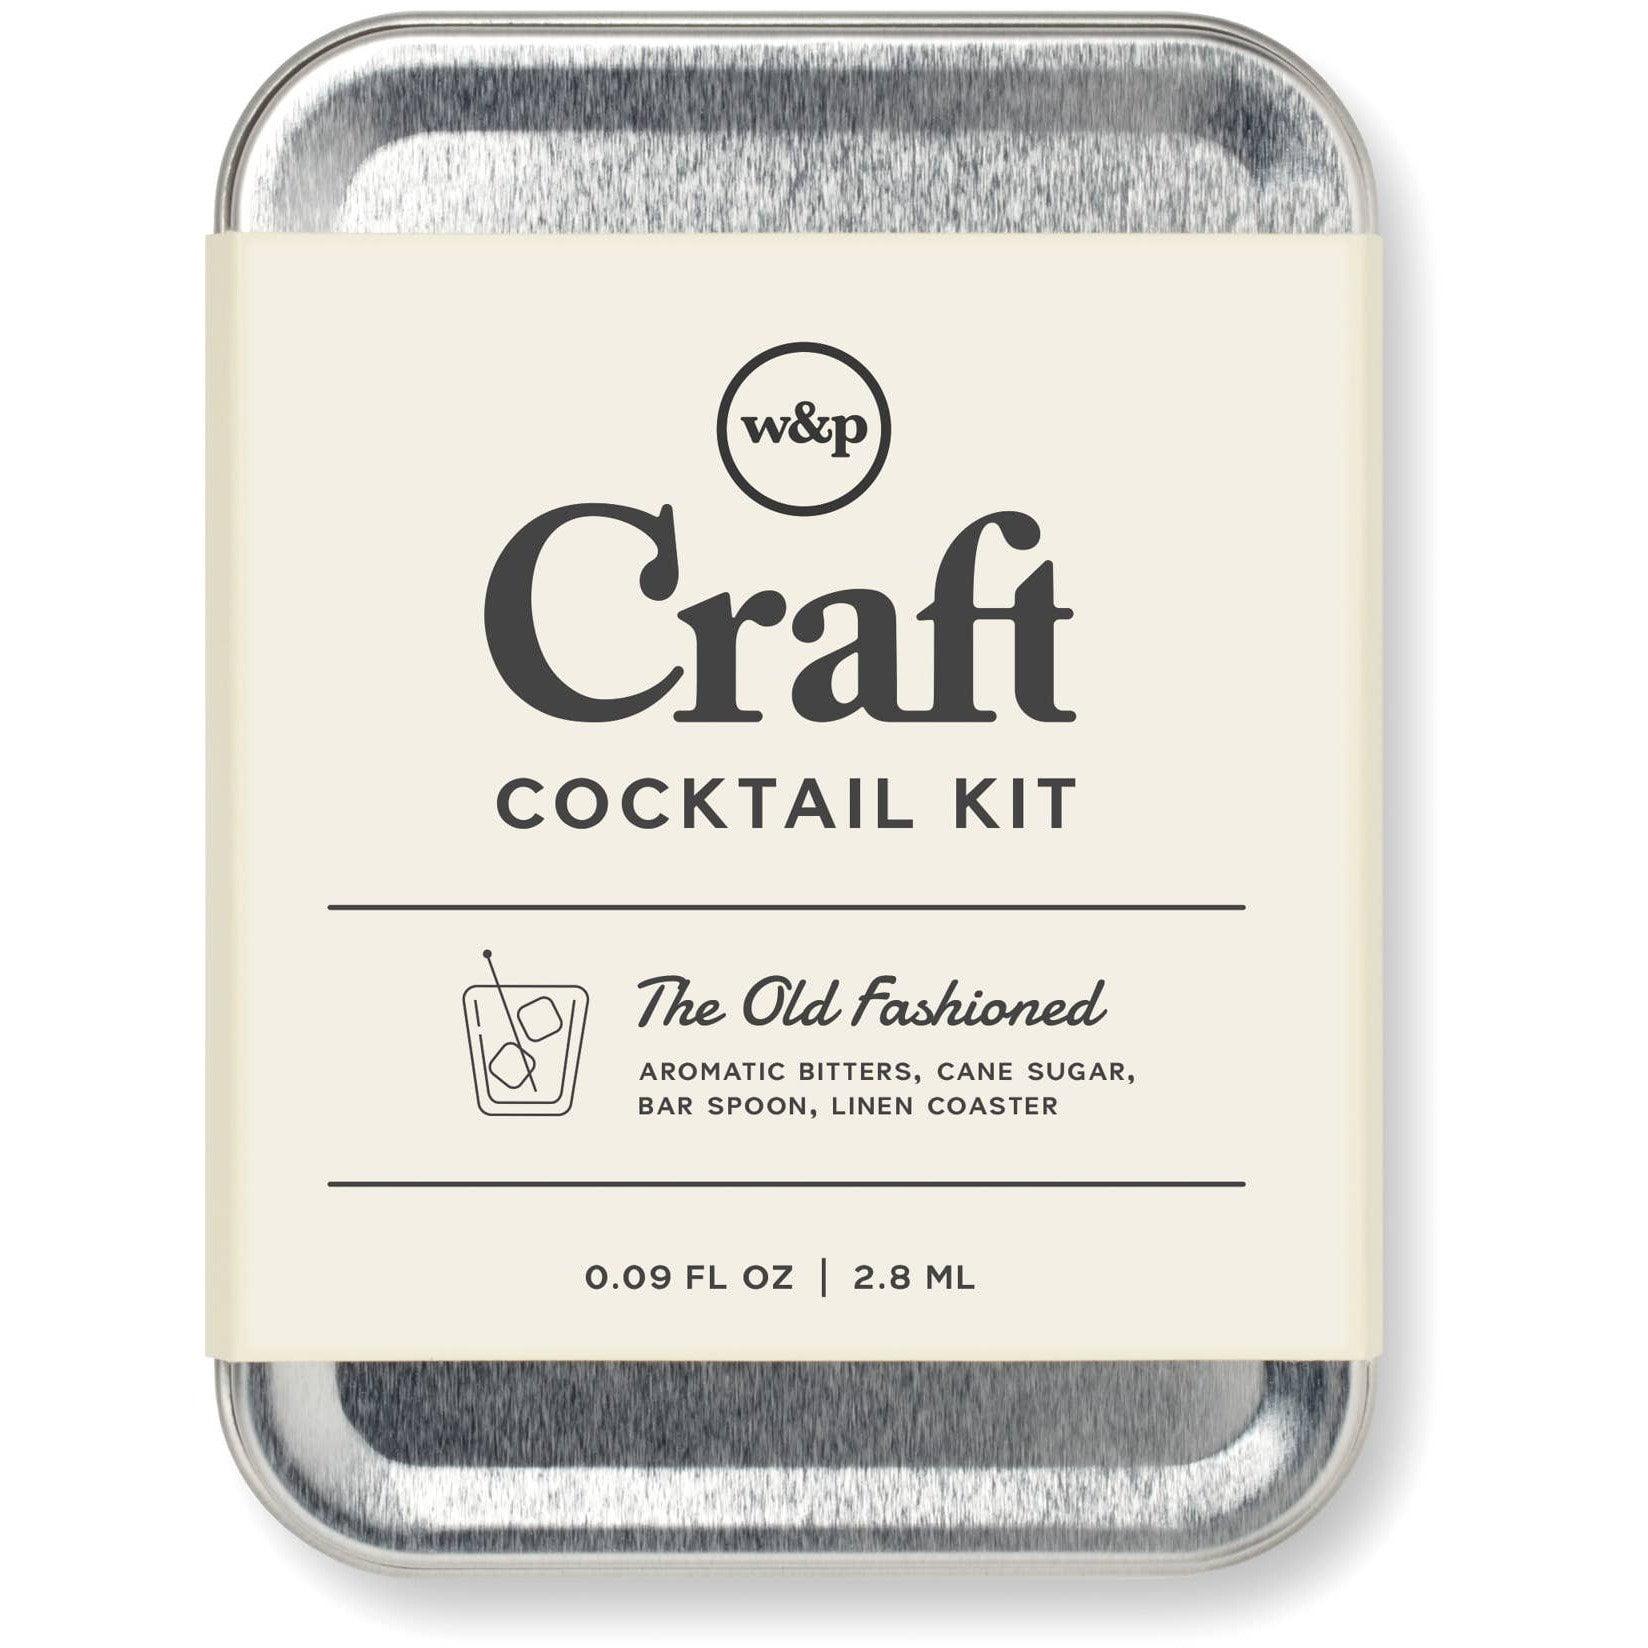 Compact Travel-Ready Old Fashioned Cocktail Kit, 7-Piece Set